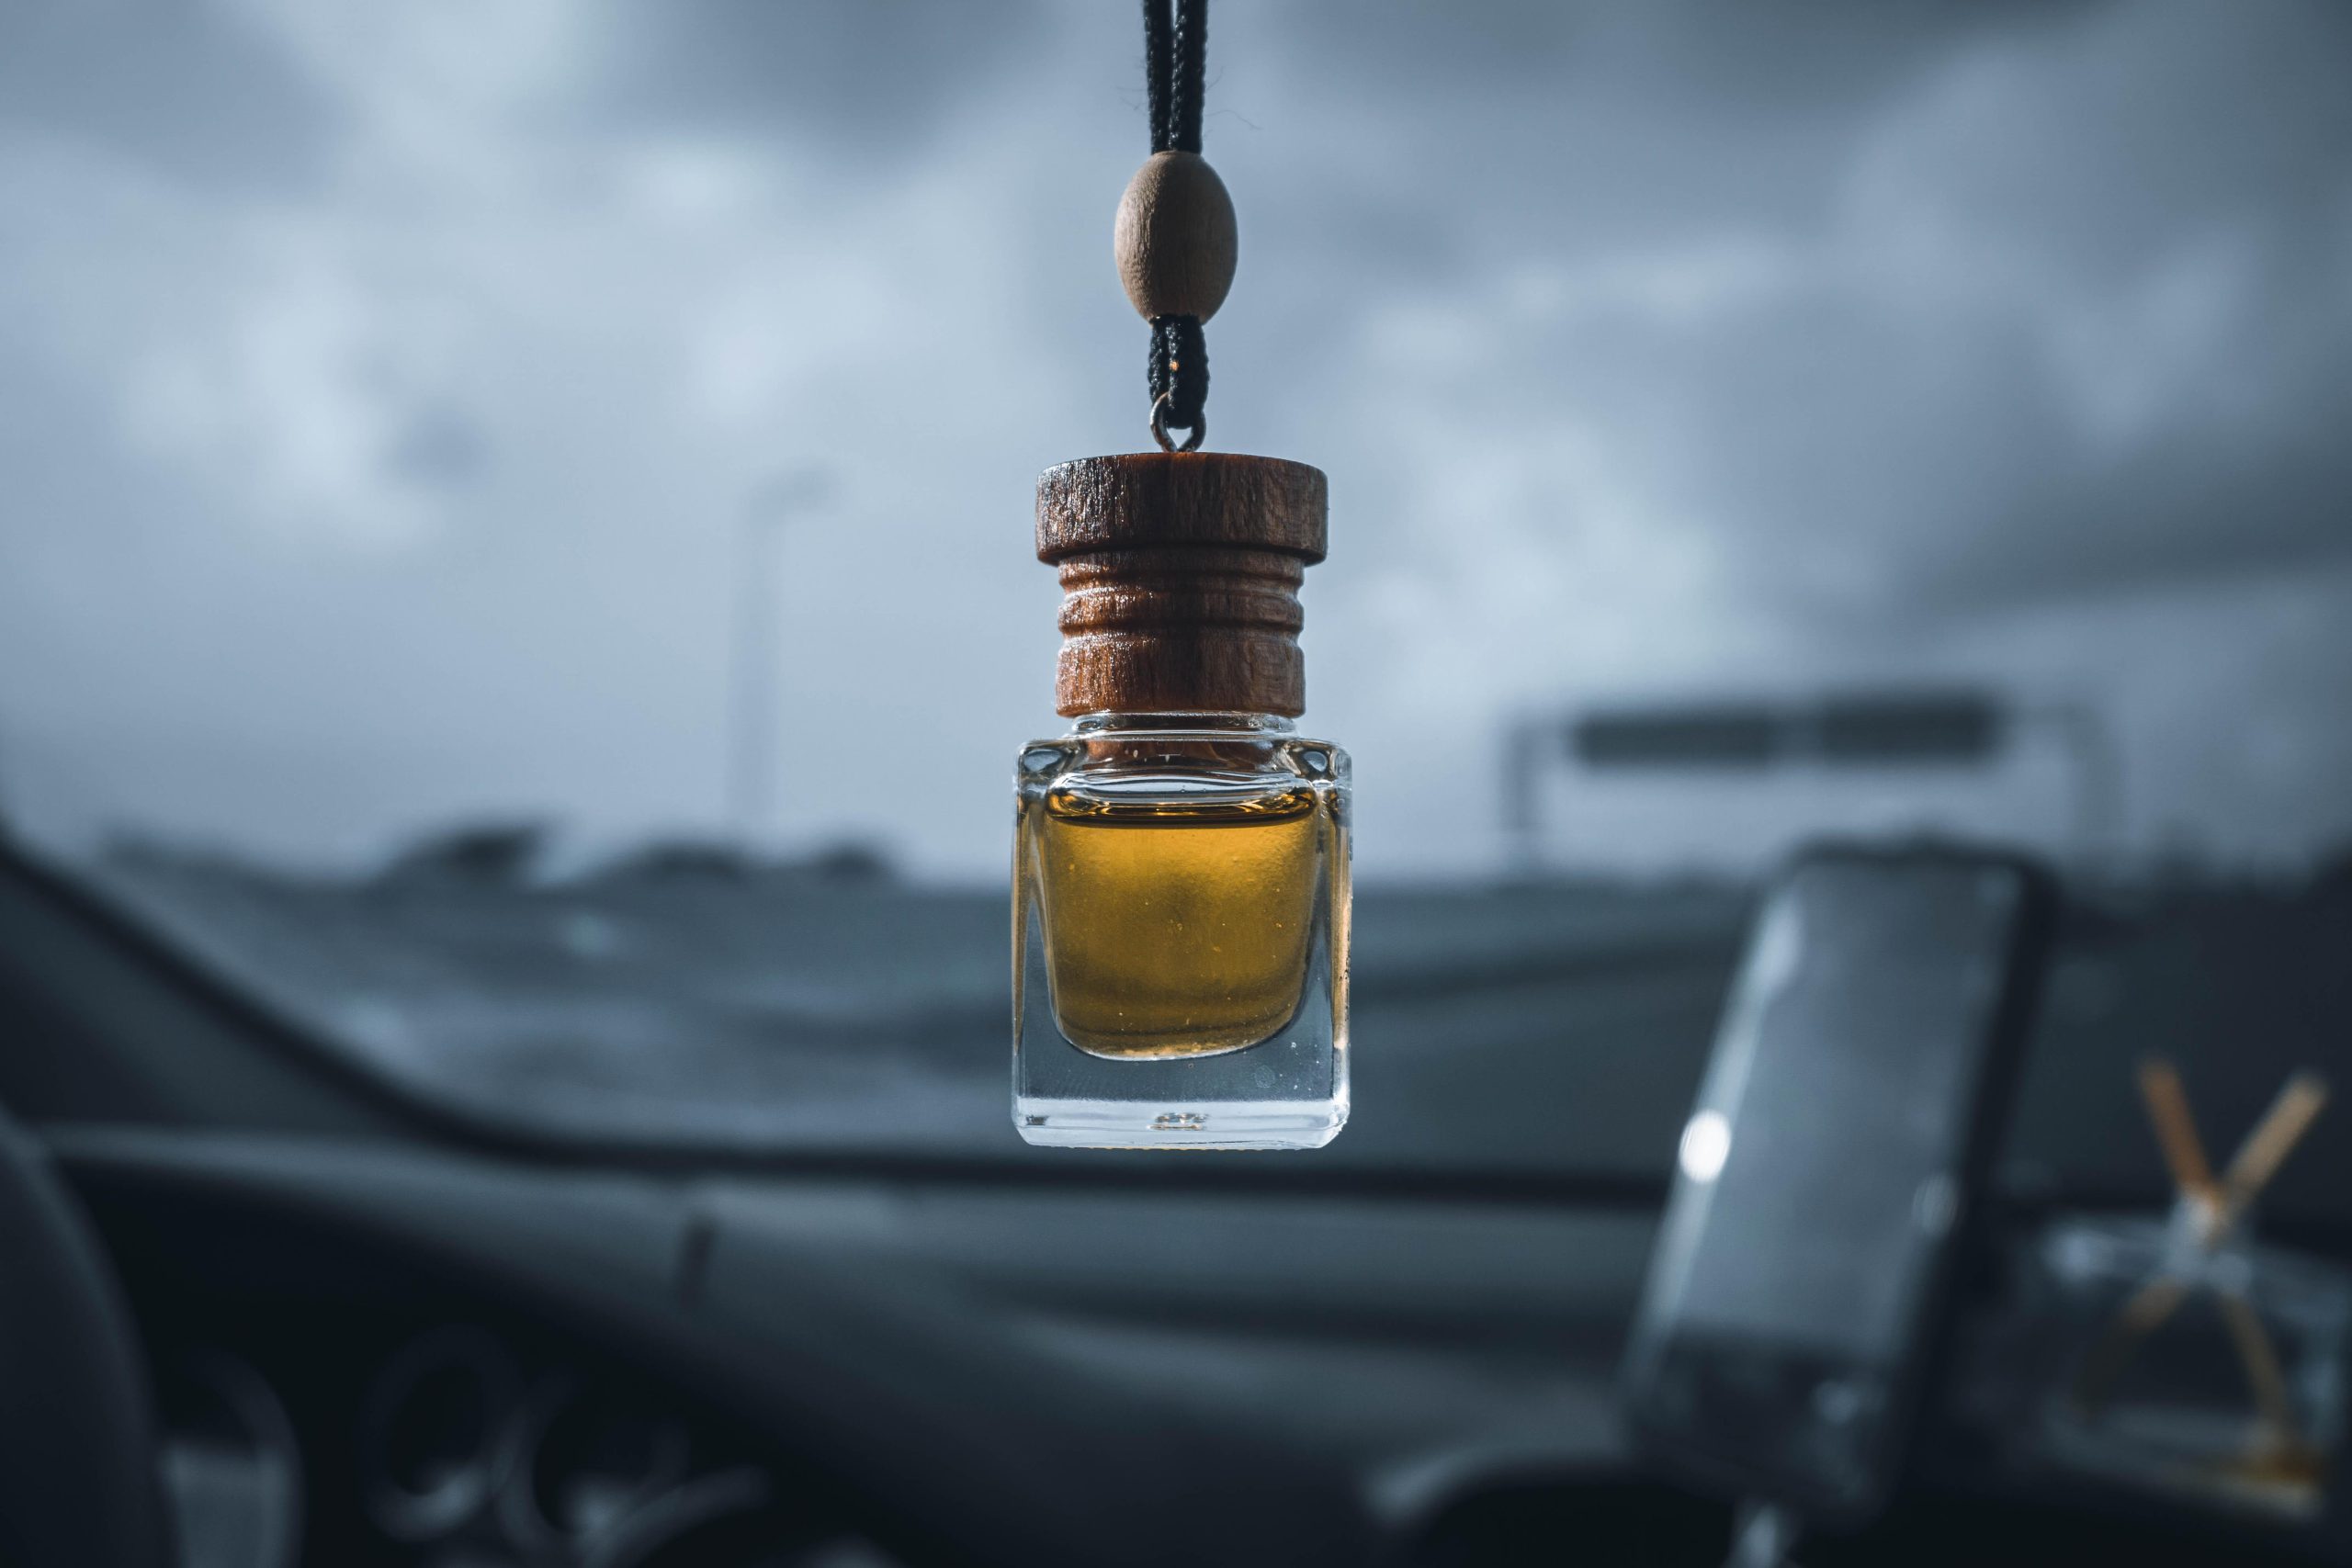 Enhance Your Drive with the Alluring Aroma of Car Perfume Bottles